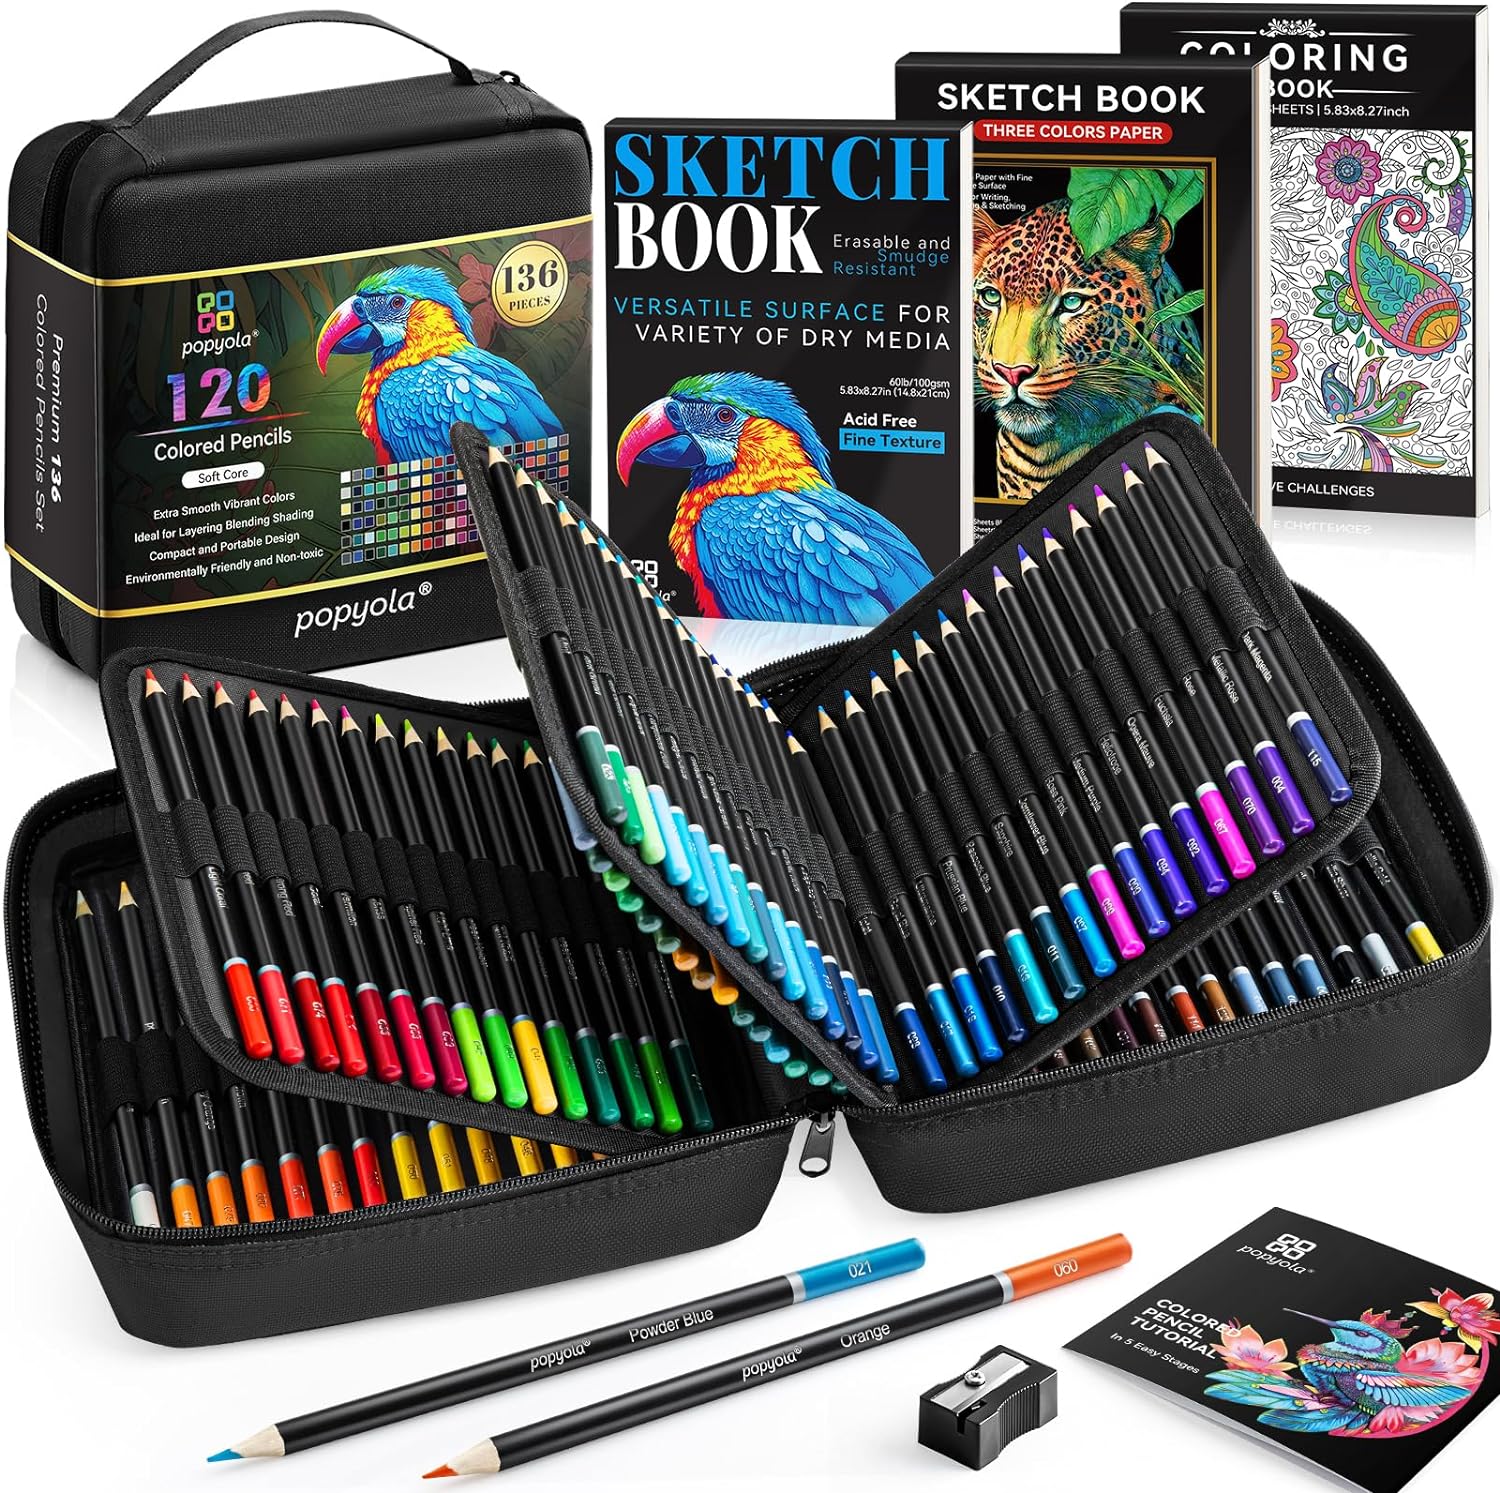 POPYOLA 136 Pack Colored Pencils Set with Portable Gift Case, Art Supplies 120 Colored Pencils, 3-Color Sketch Book, Coloring Book, Sketchbook, Sharpener, Professional Drawing Pencils for Adults Kids